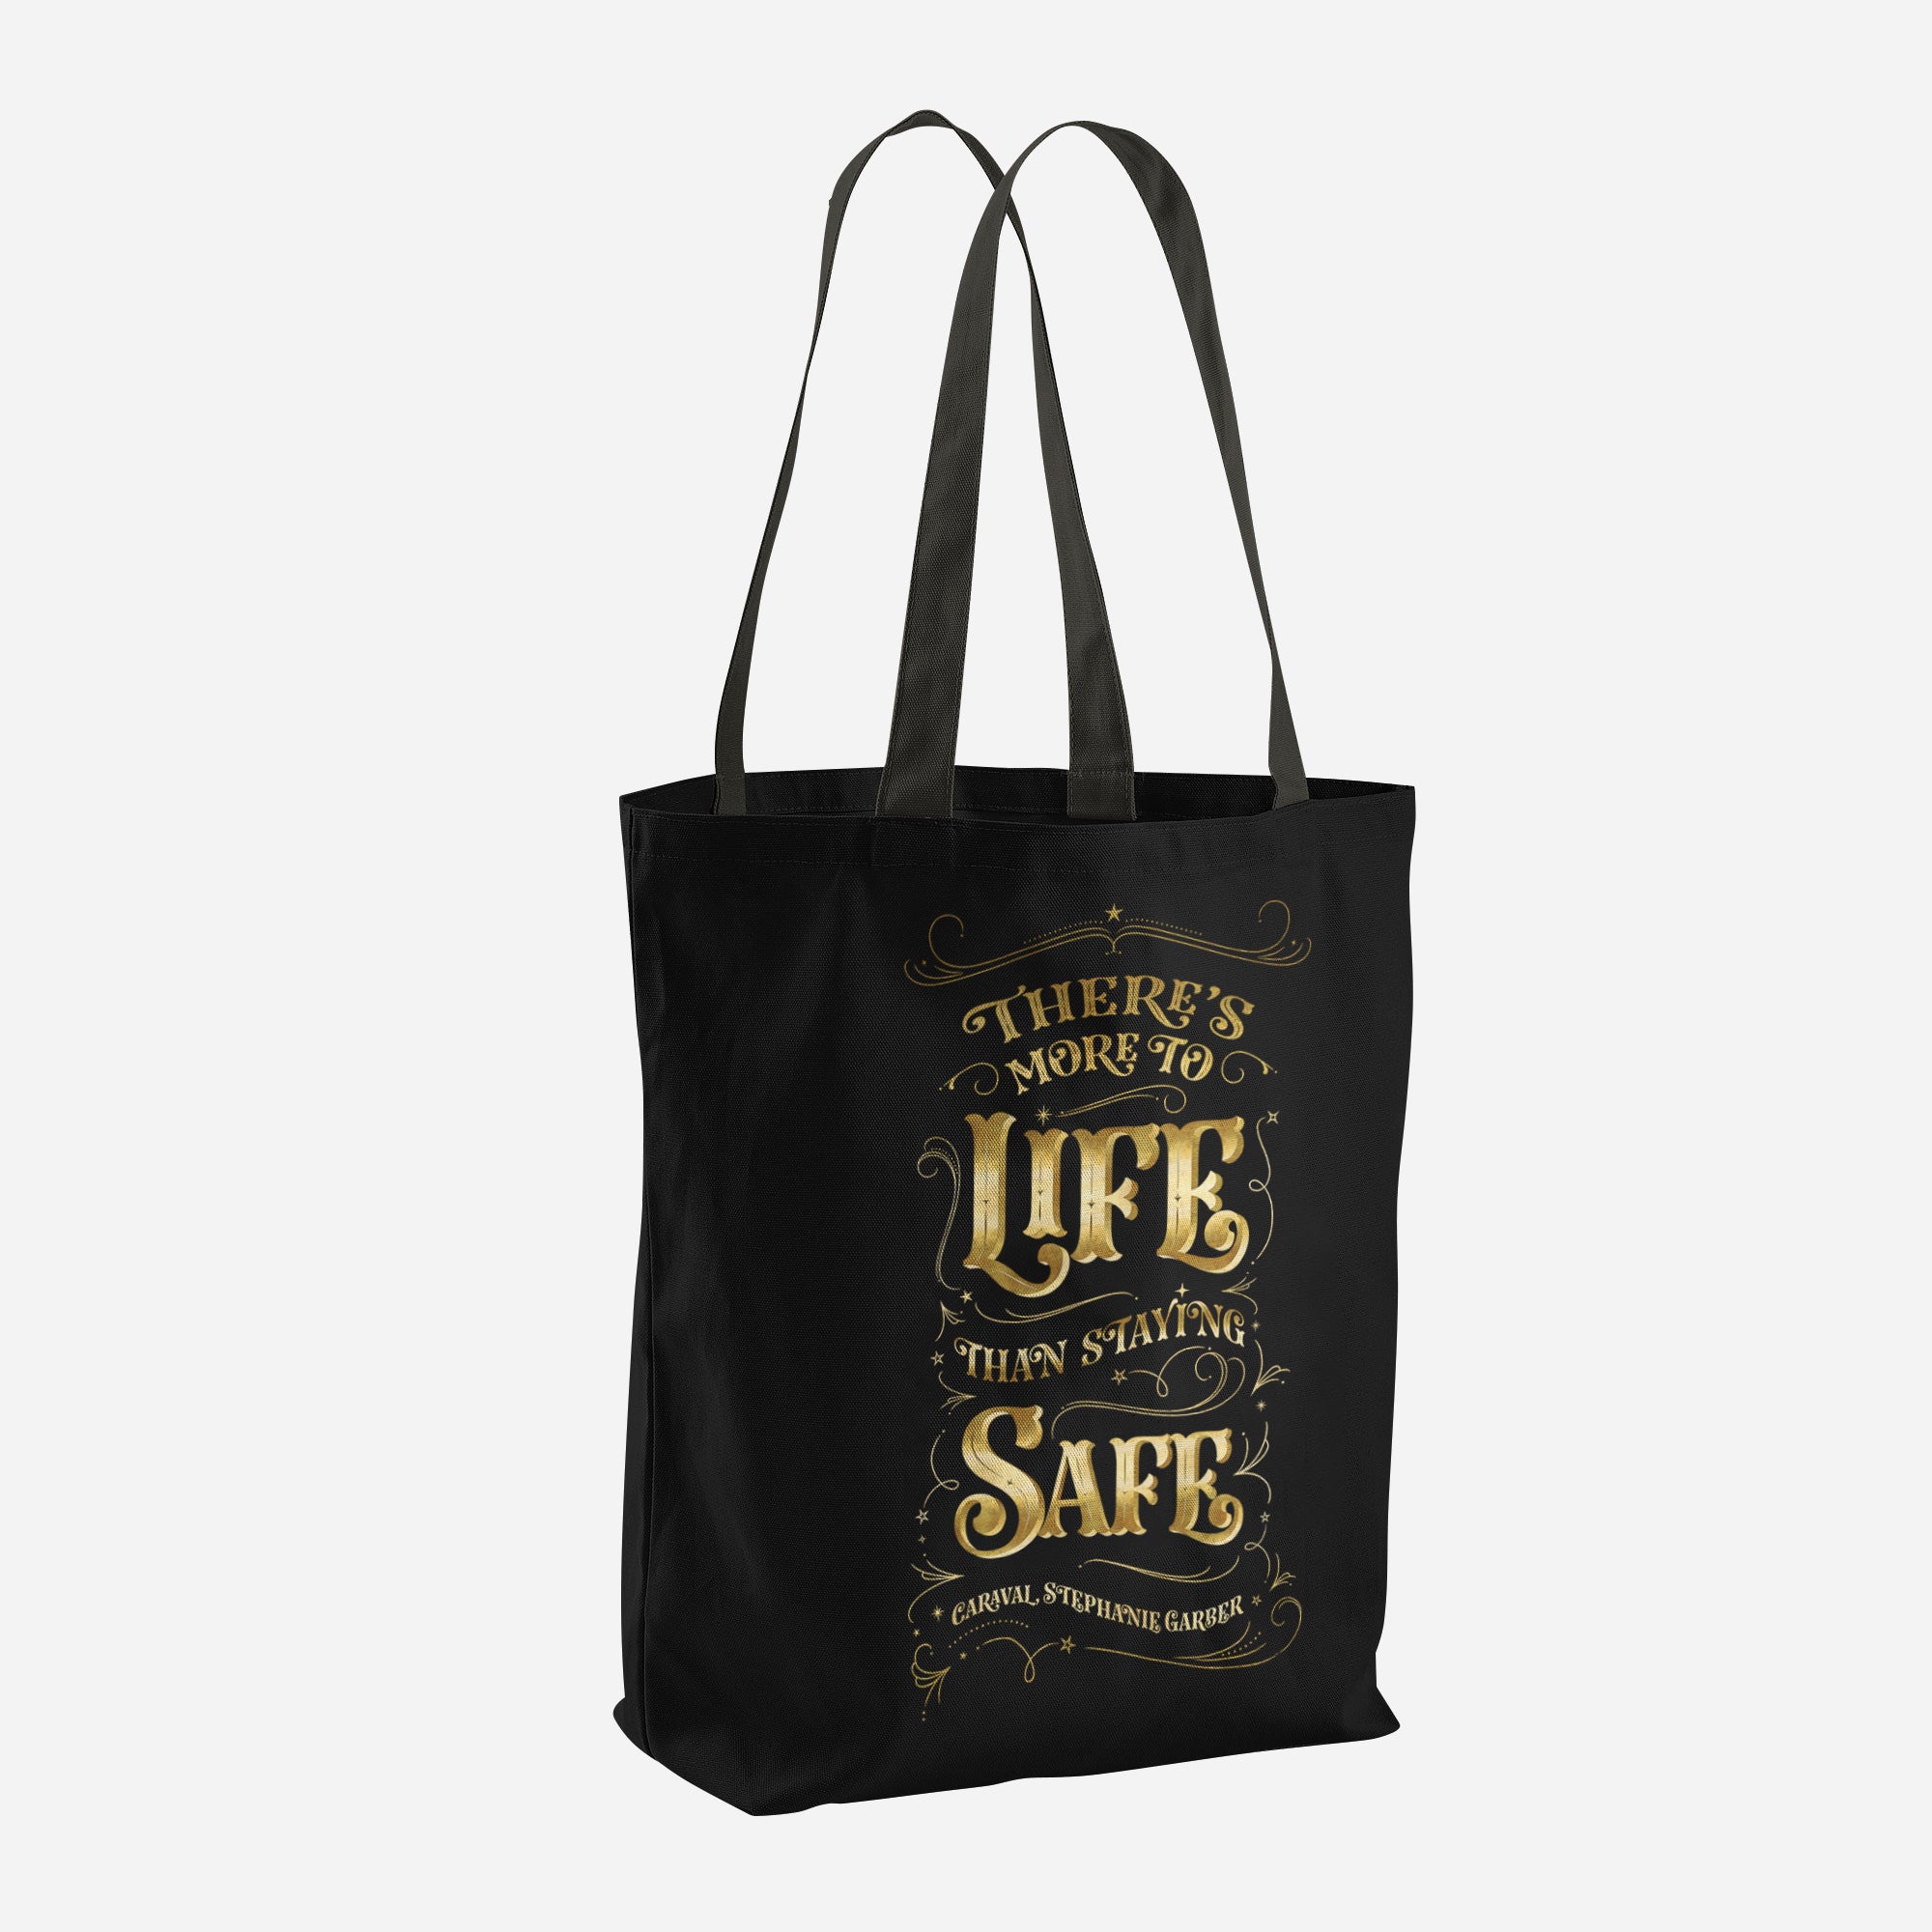 There's more to life... Caraval Tote Bag